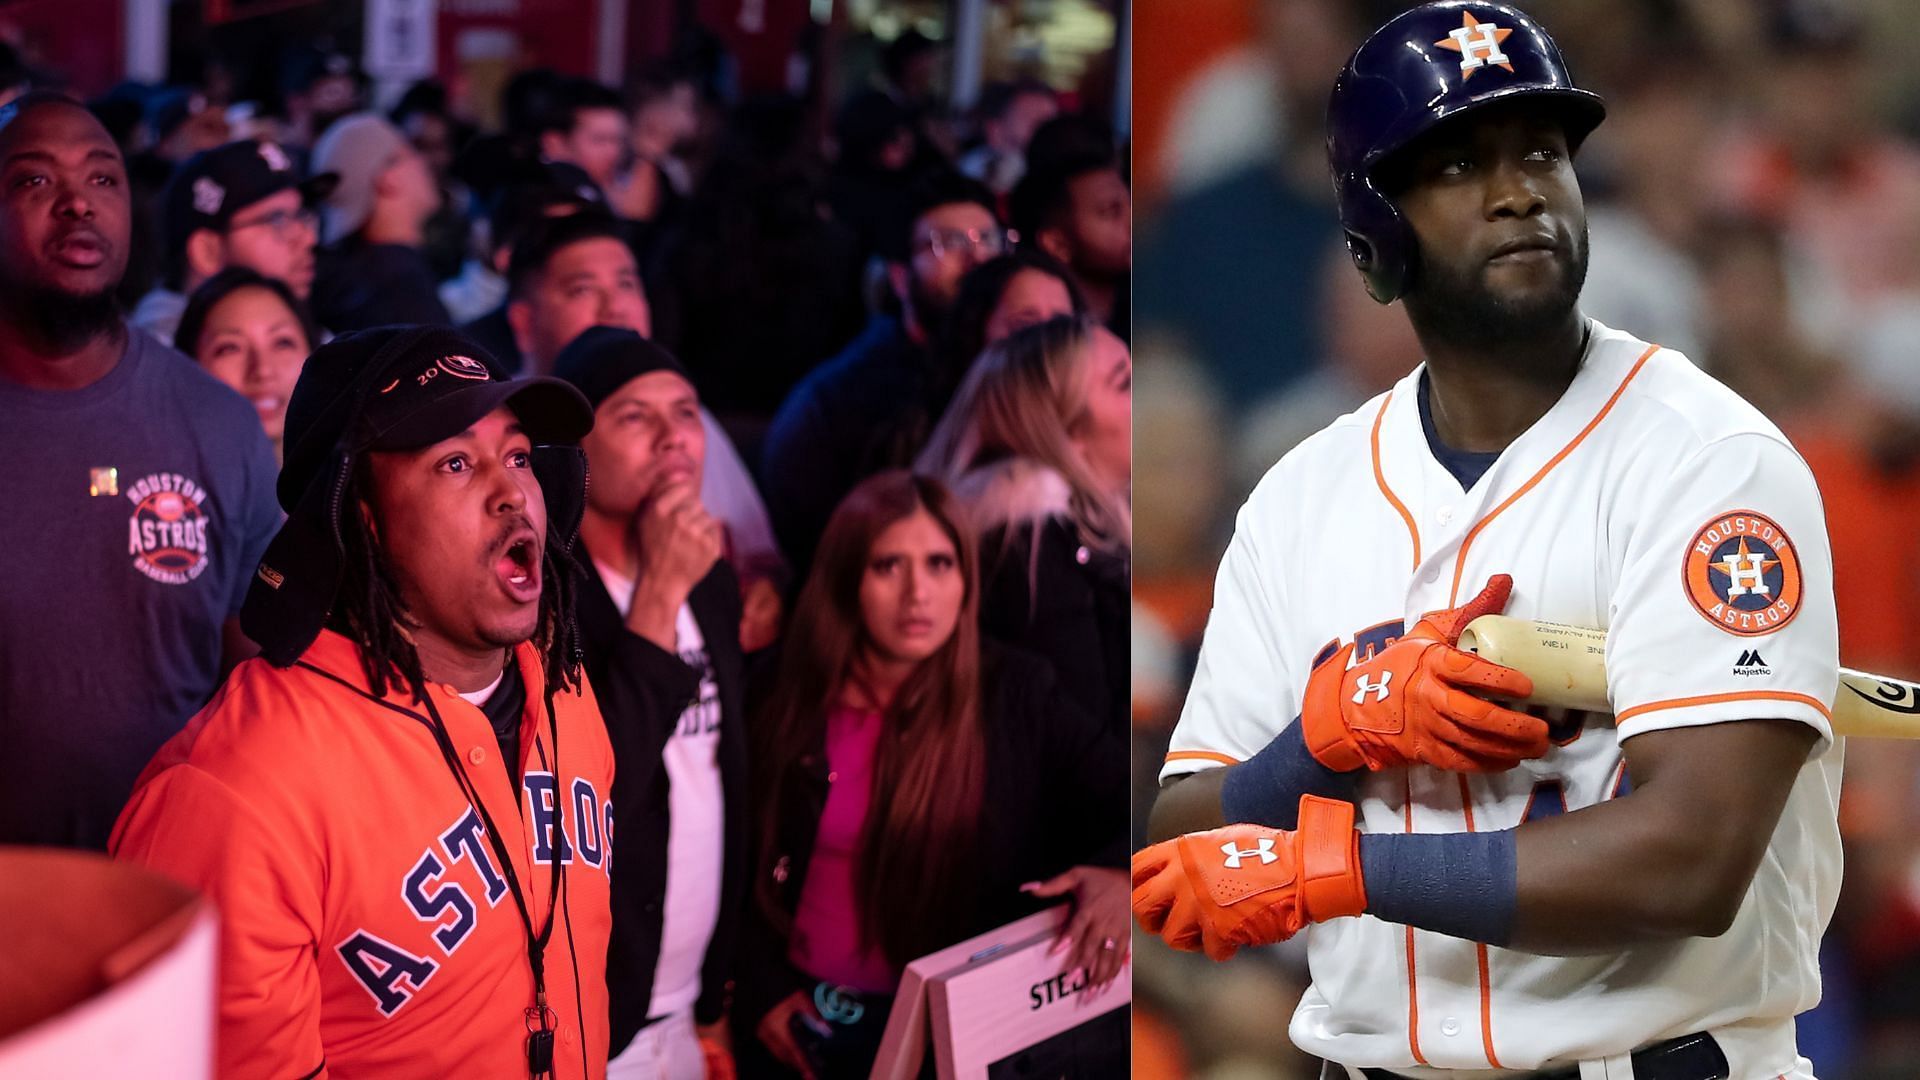 Houston Astros are not pleased with their team